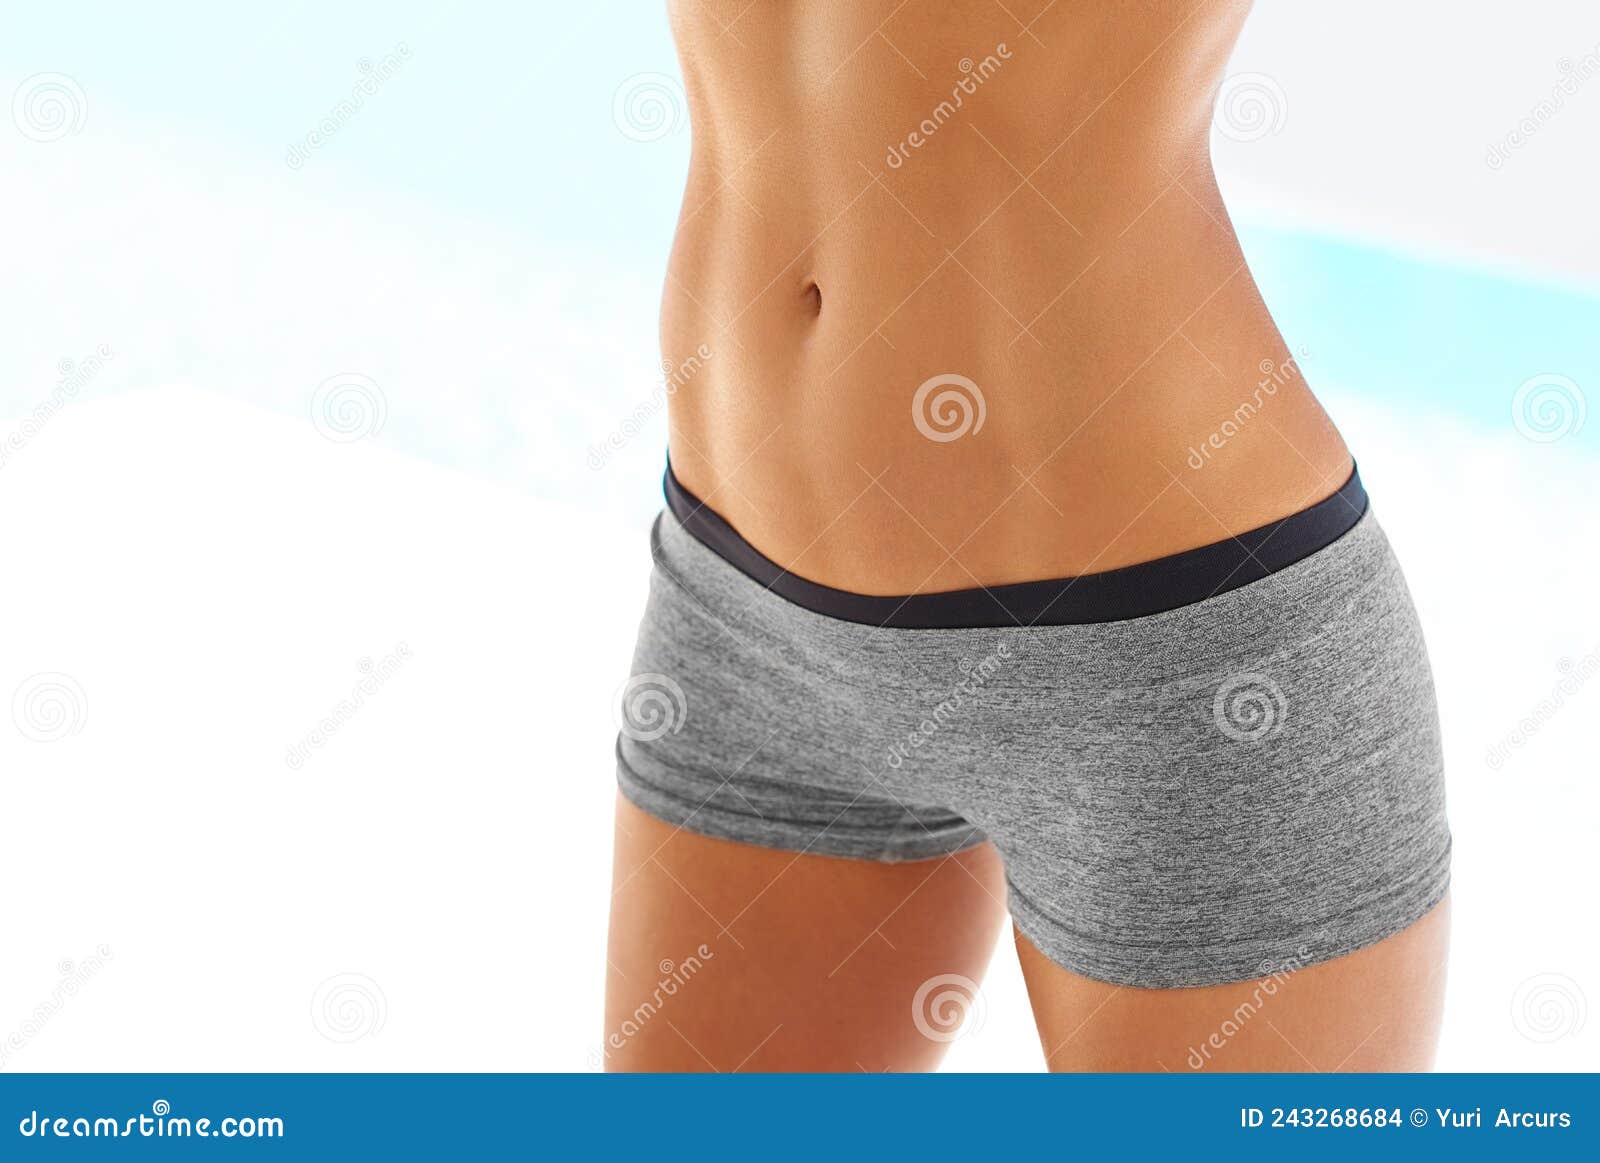 You Earn Your Body. Cropped Shot of a Woman with a Toned Stomach